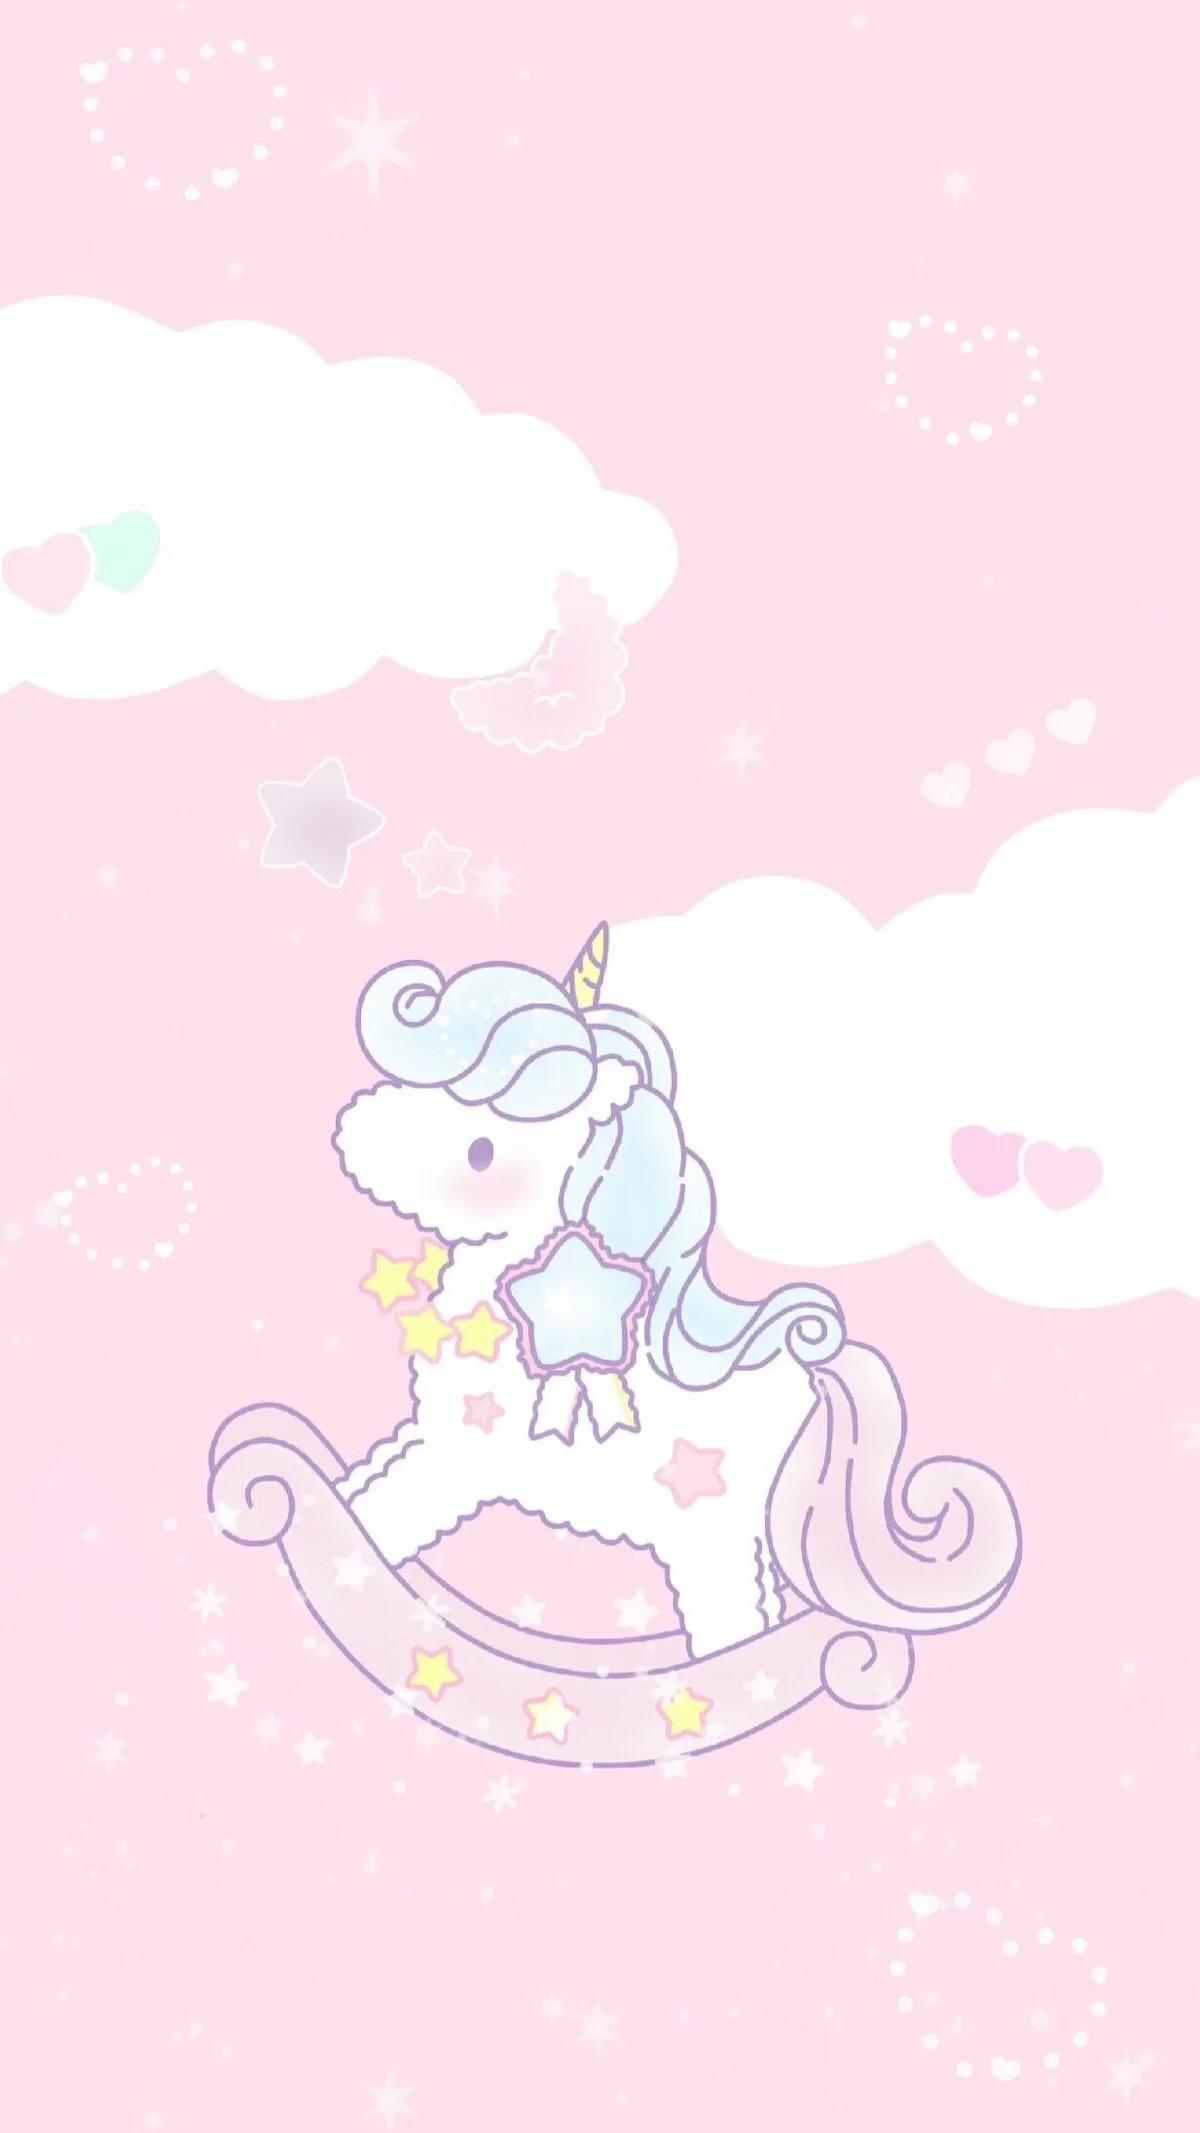 Kawaii Unicorn For Iphone Wallpapers Wallpaper Cave